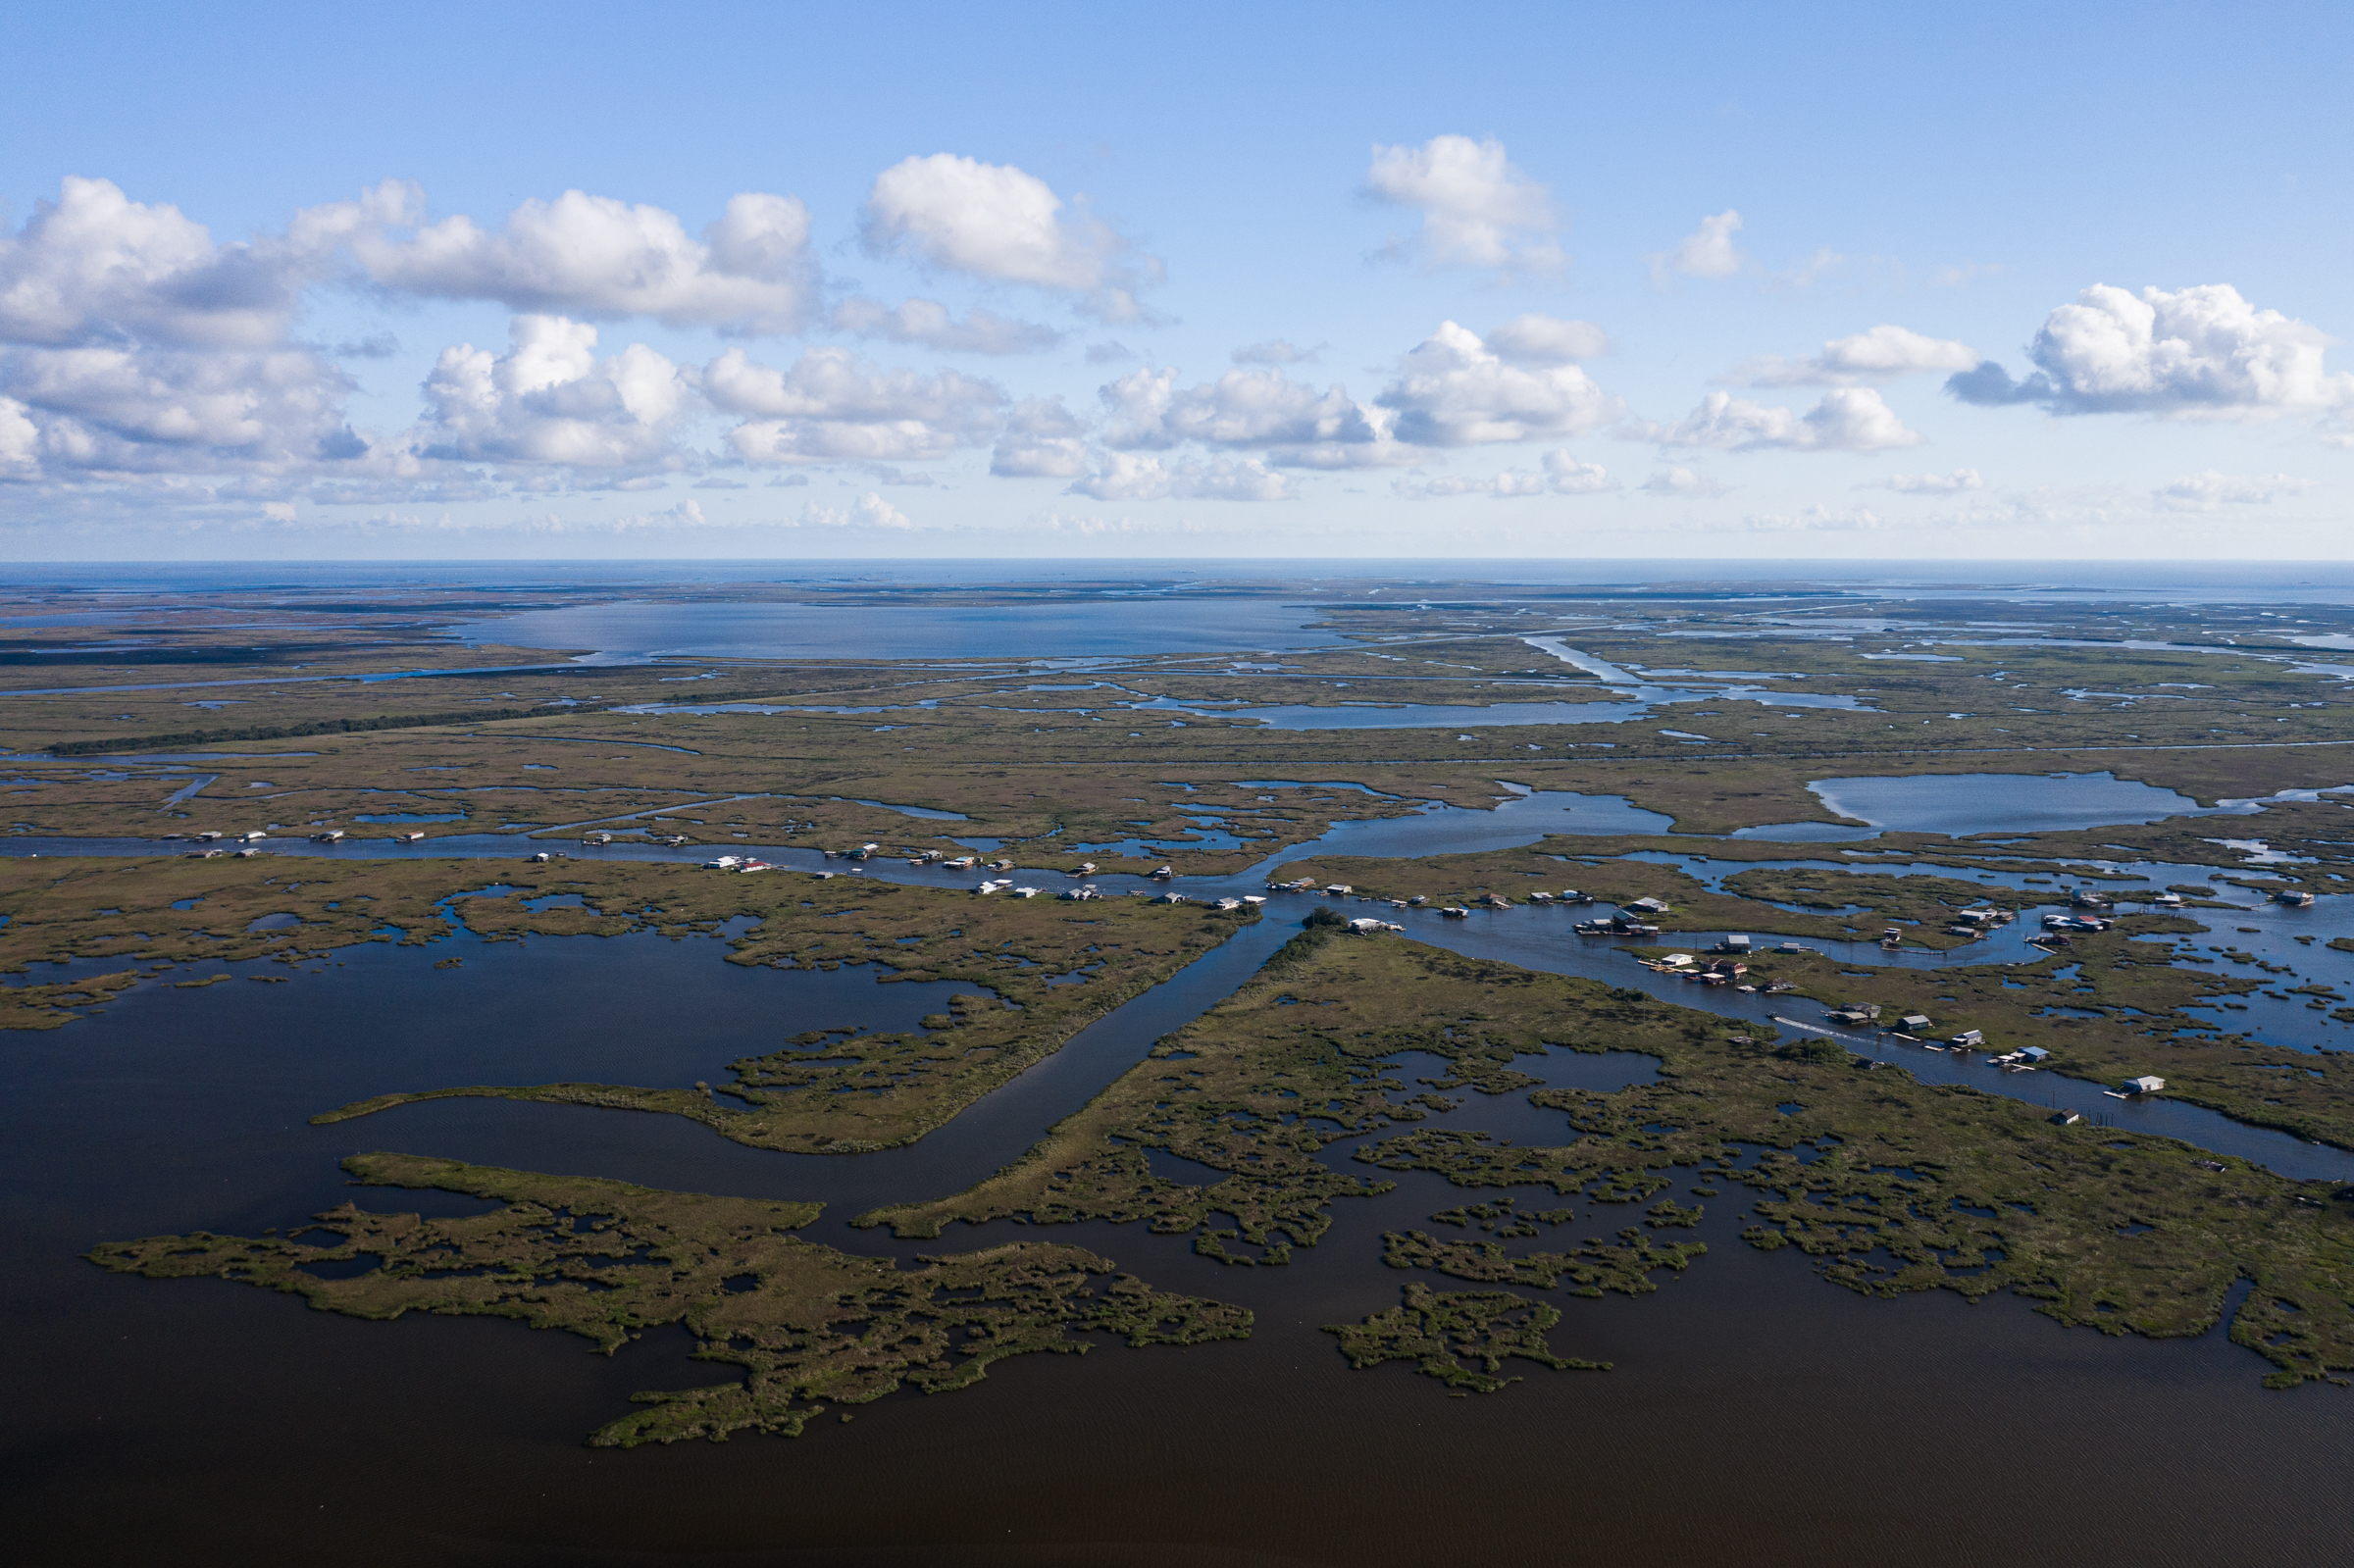 Marsh and canals surrounding Grand Bayou Road along HWY 23 in south Louisiana